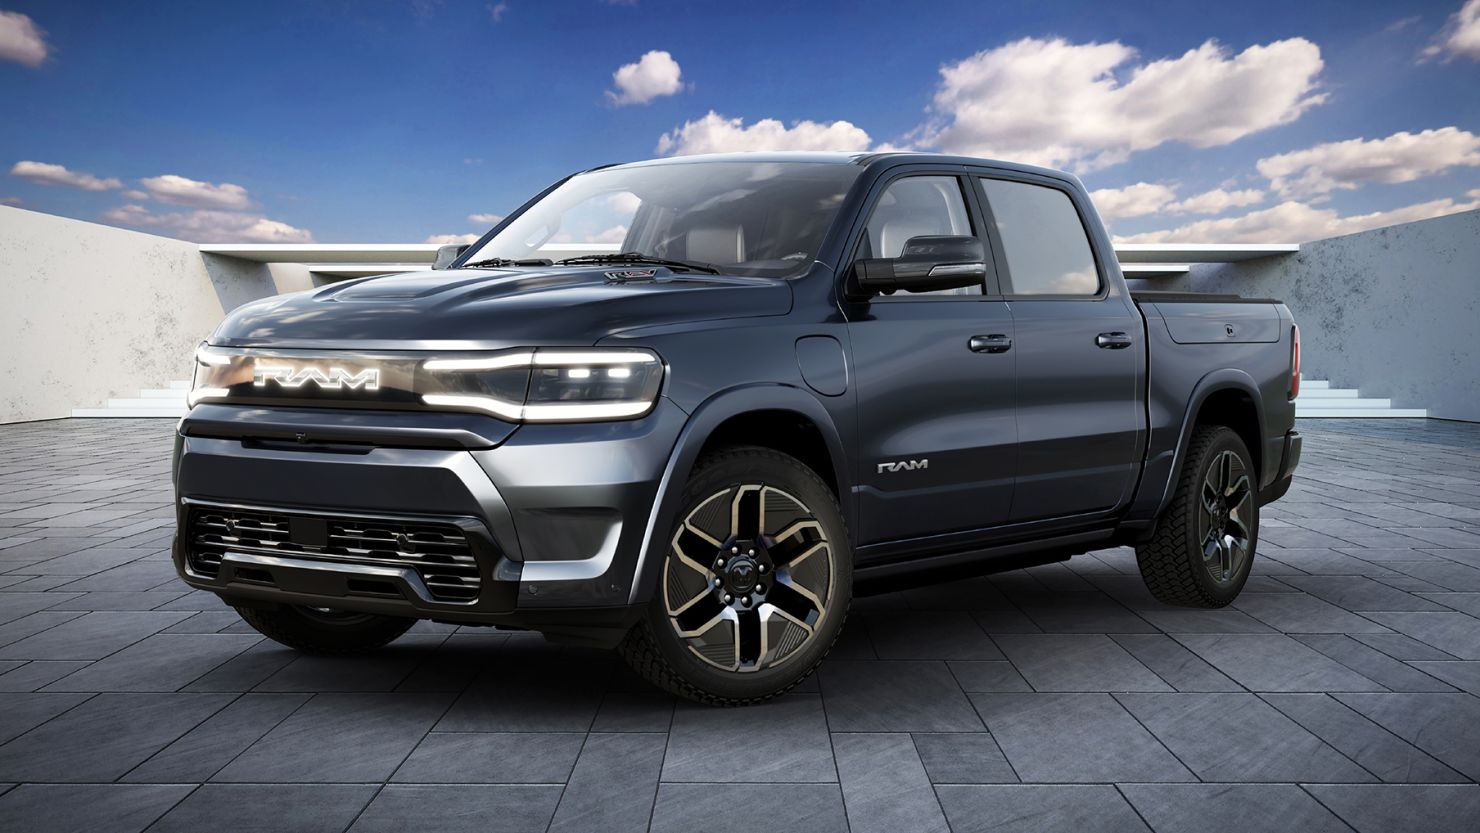 Ram reveals its electric truck during Super Bowl and it looks nothing like  the concept